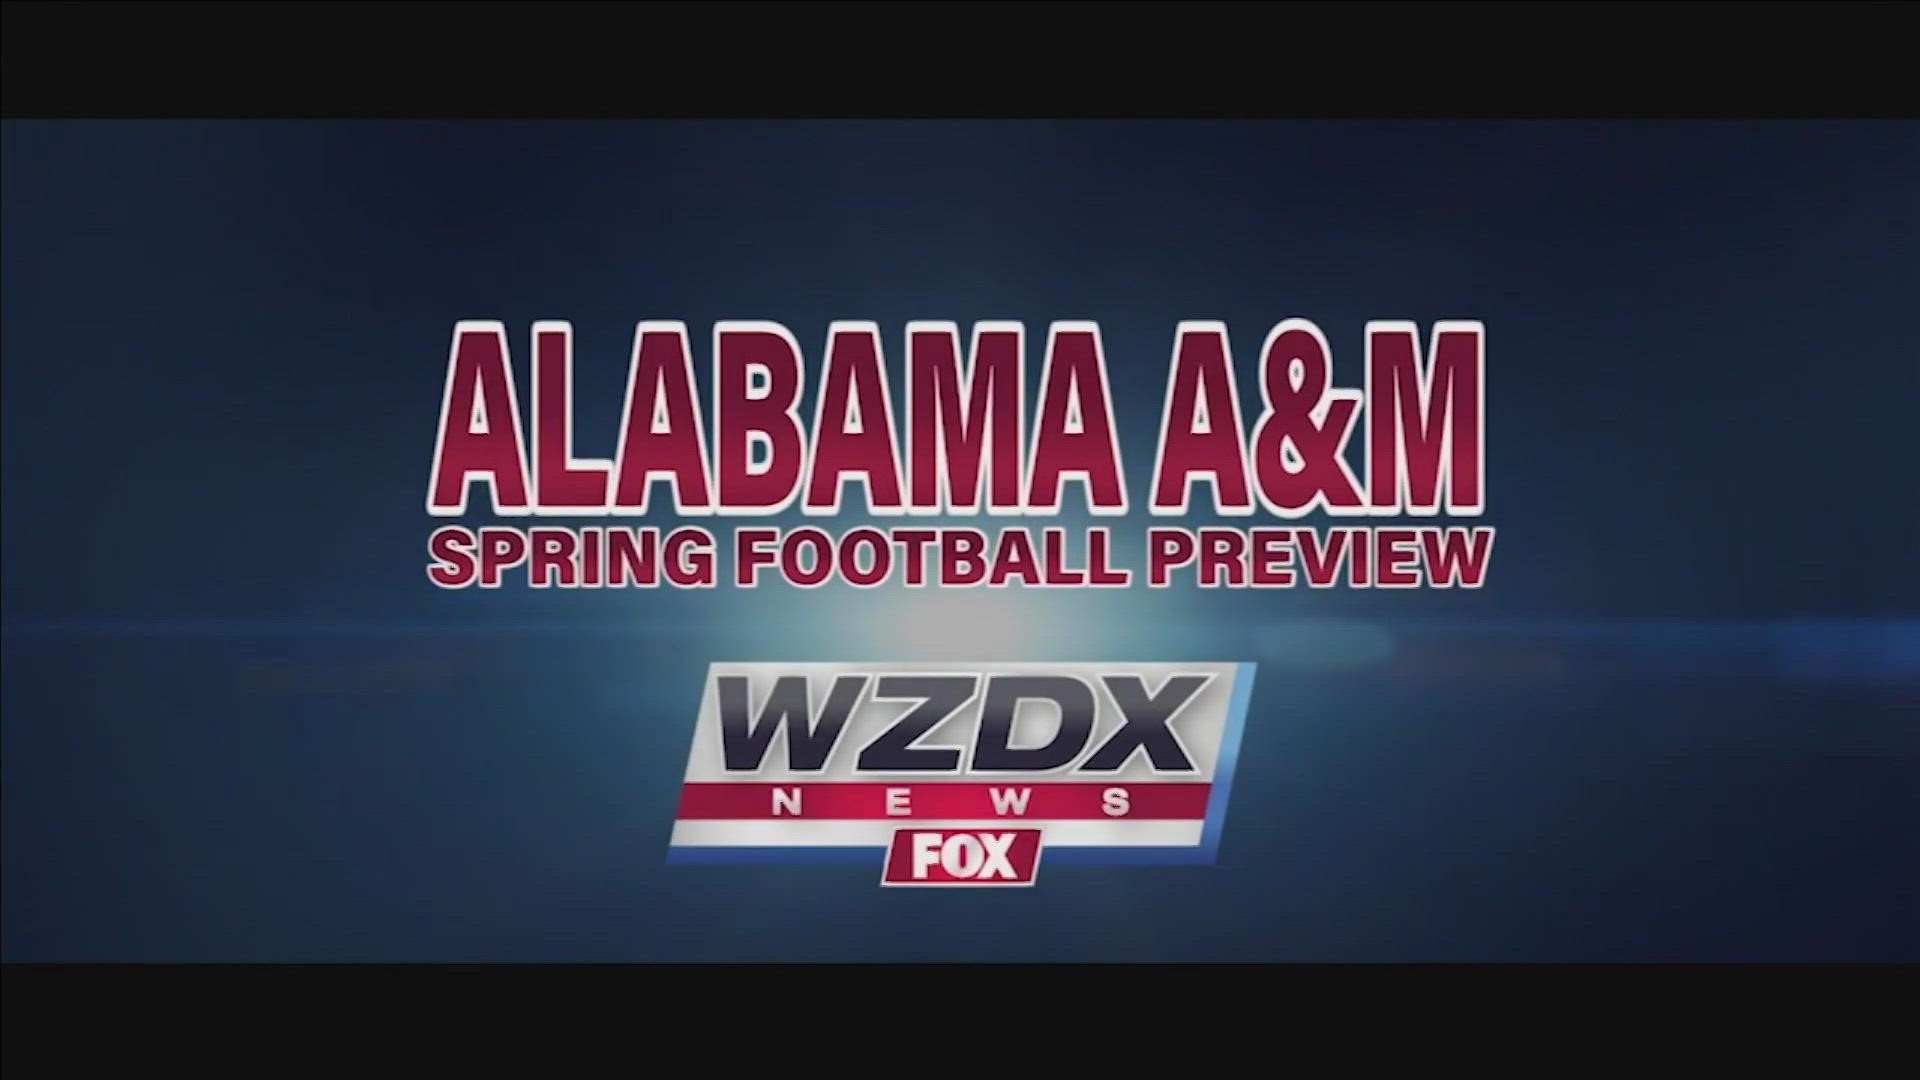 The Alabama A&M Bulldogs are on a quest to win the SWAC's 2021 Spring Football Championship. Here is a preview of their upcoming season.